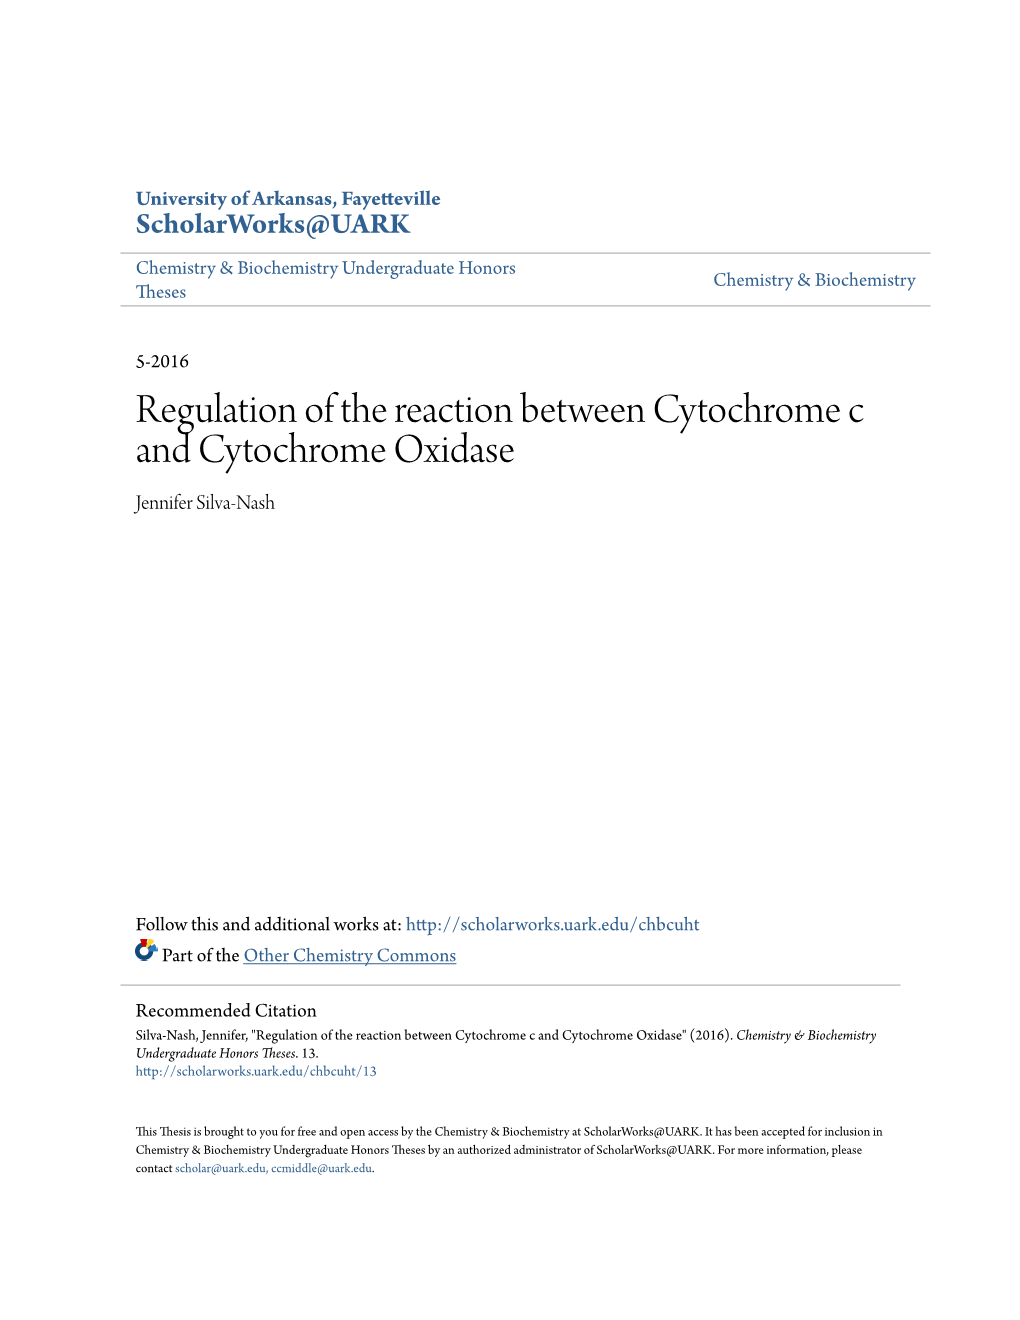 Regulation of the Reaction Between Cytochrome C and Cytochrome Oxidase Jennifer Silva-Nash